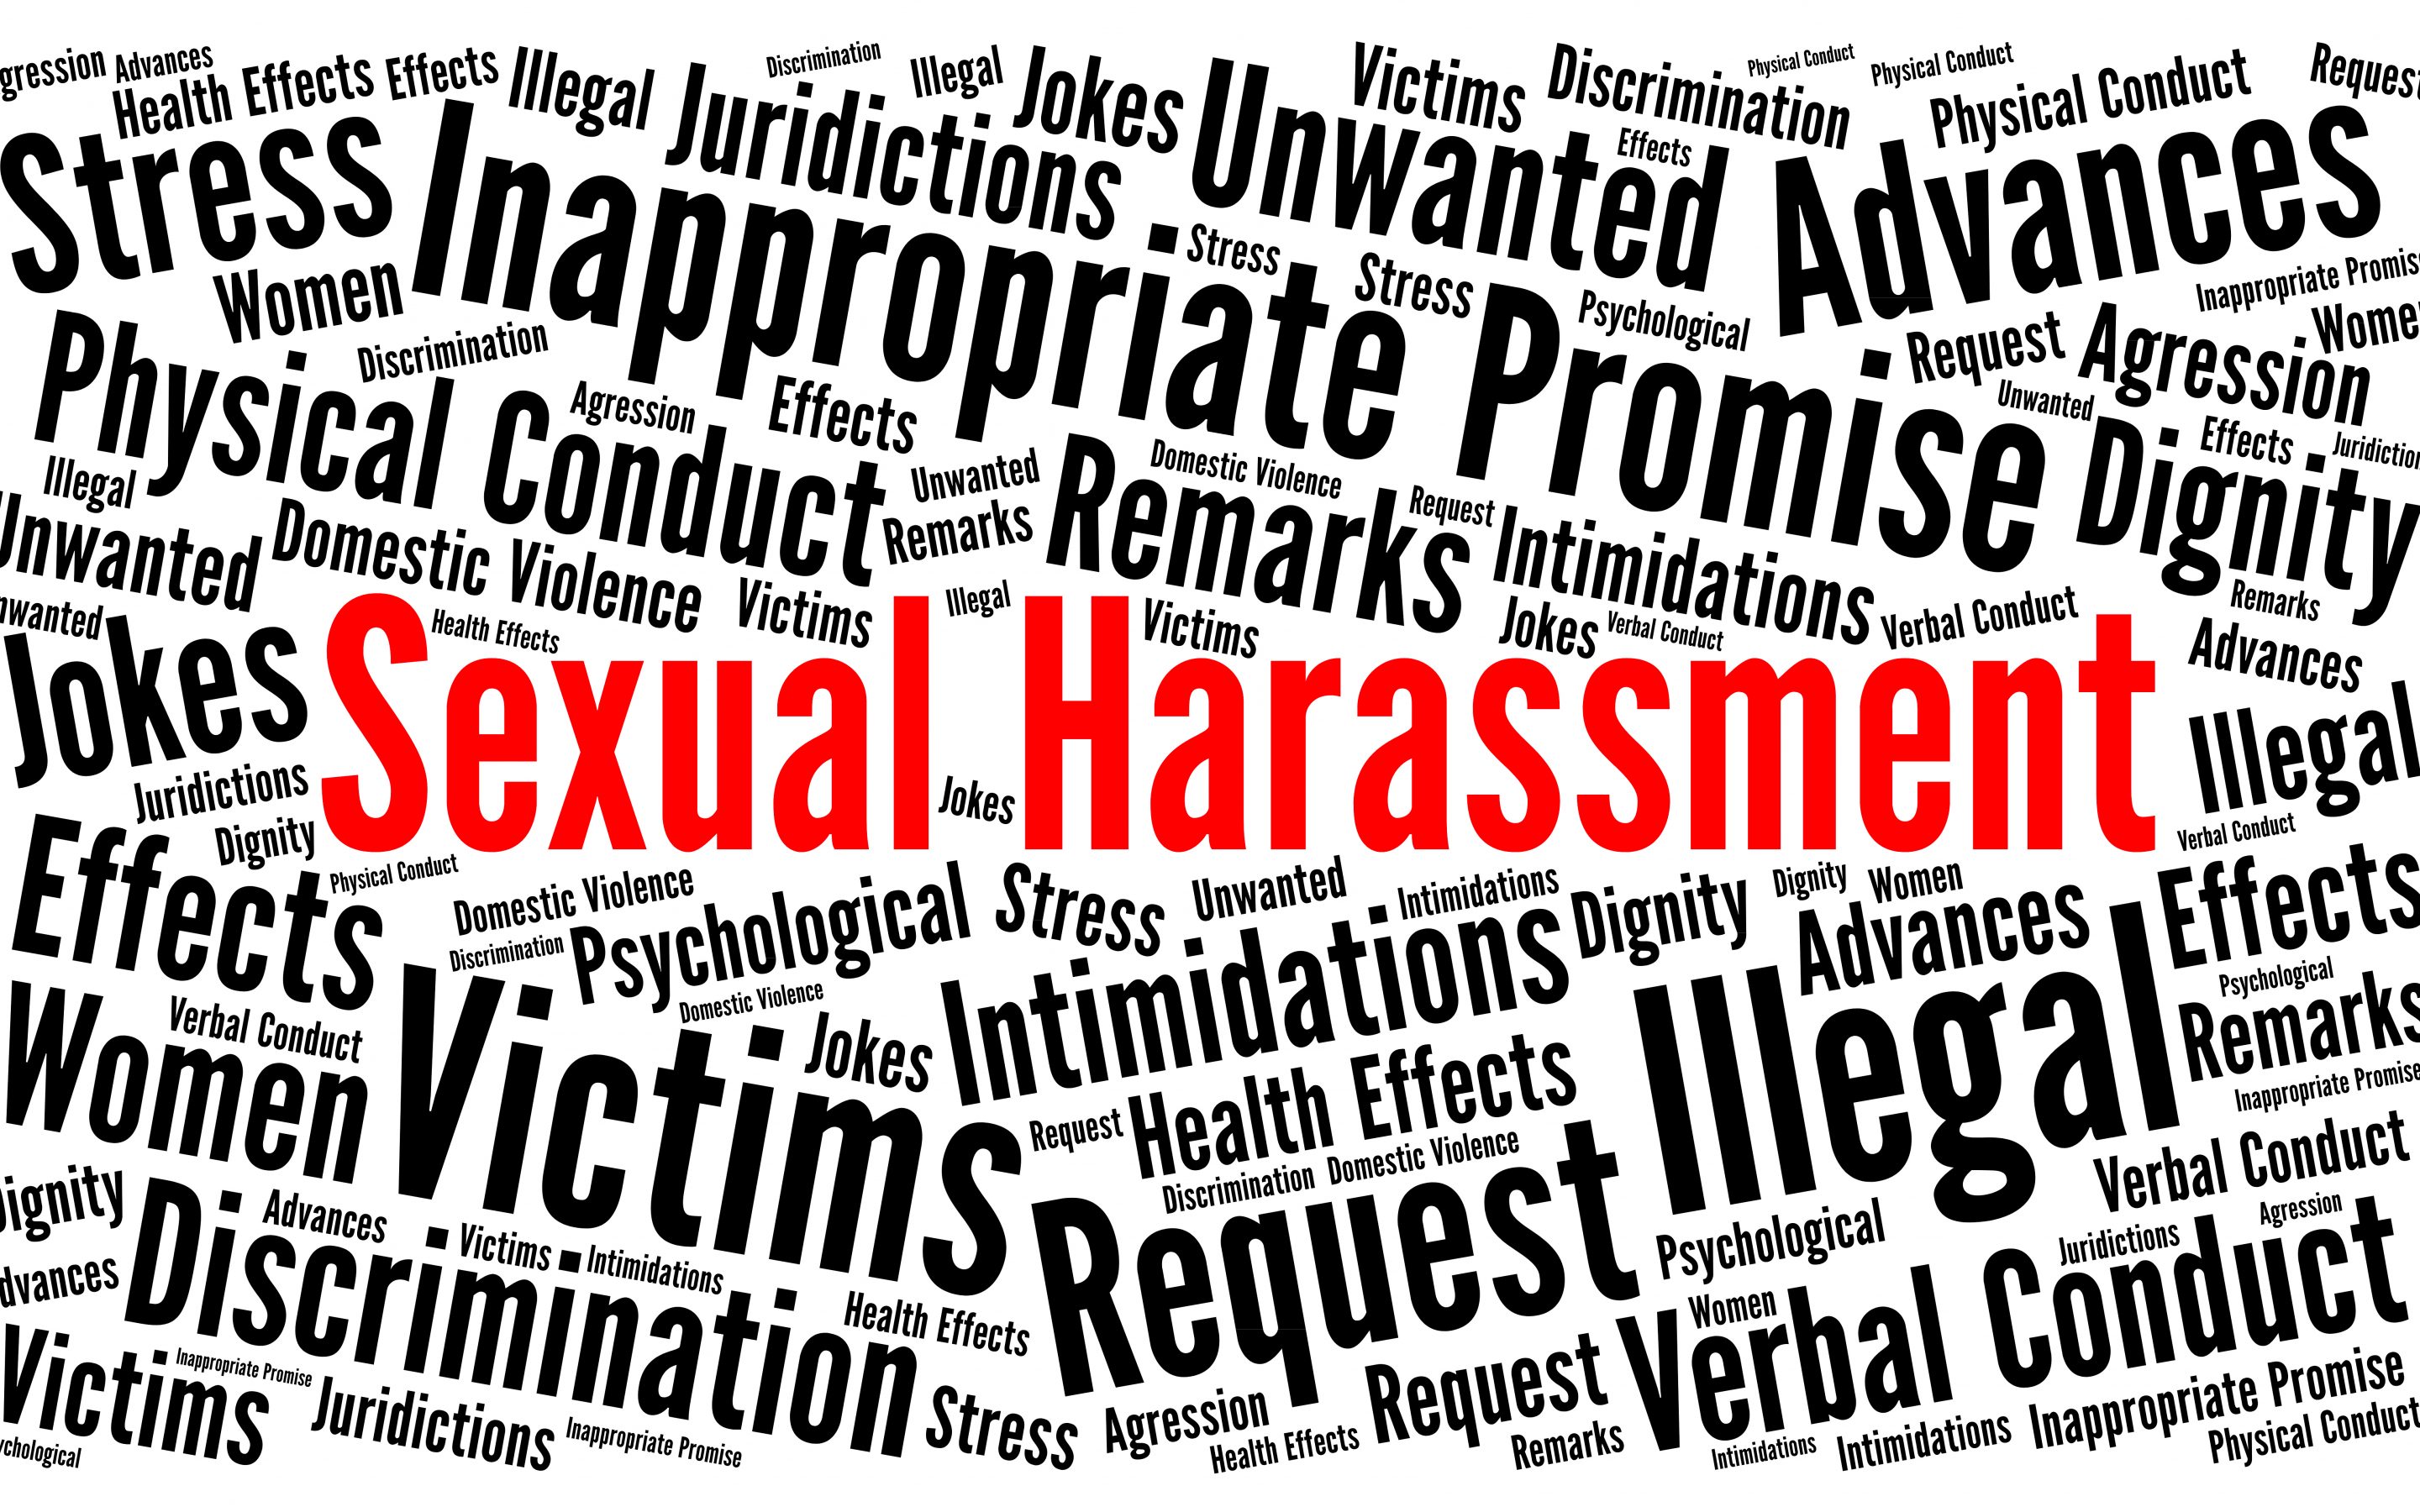 Sexual Harassment In Malaysia According To A Survey On Sexual Harassment Conducted In Malaysia